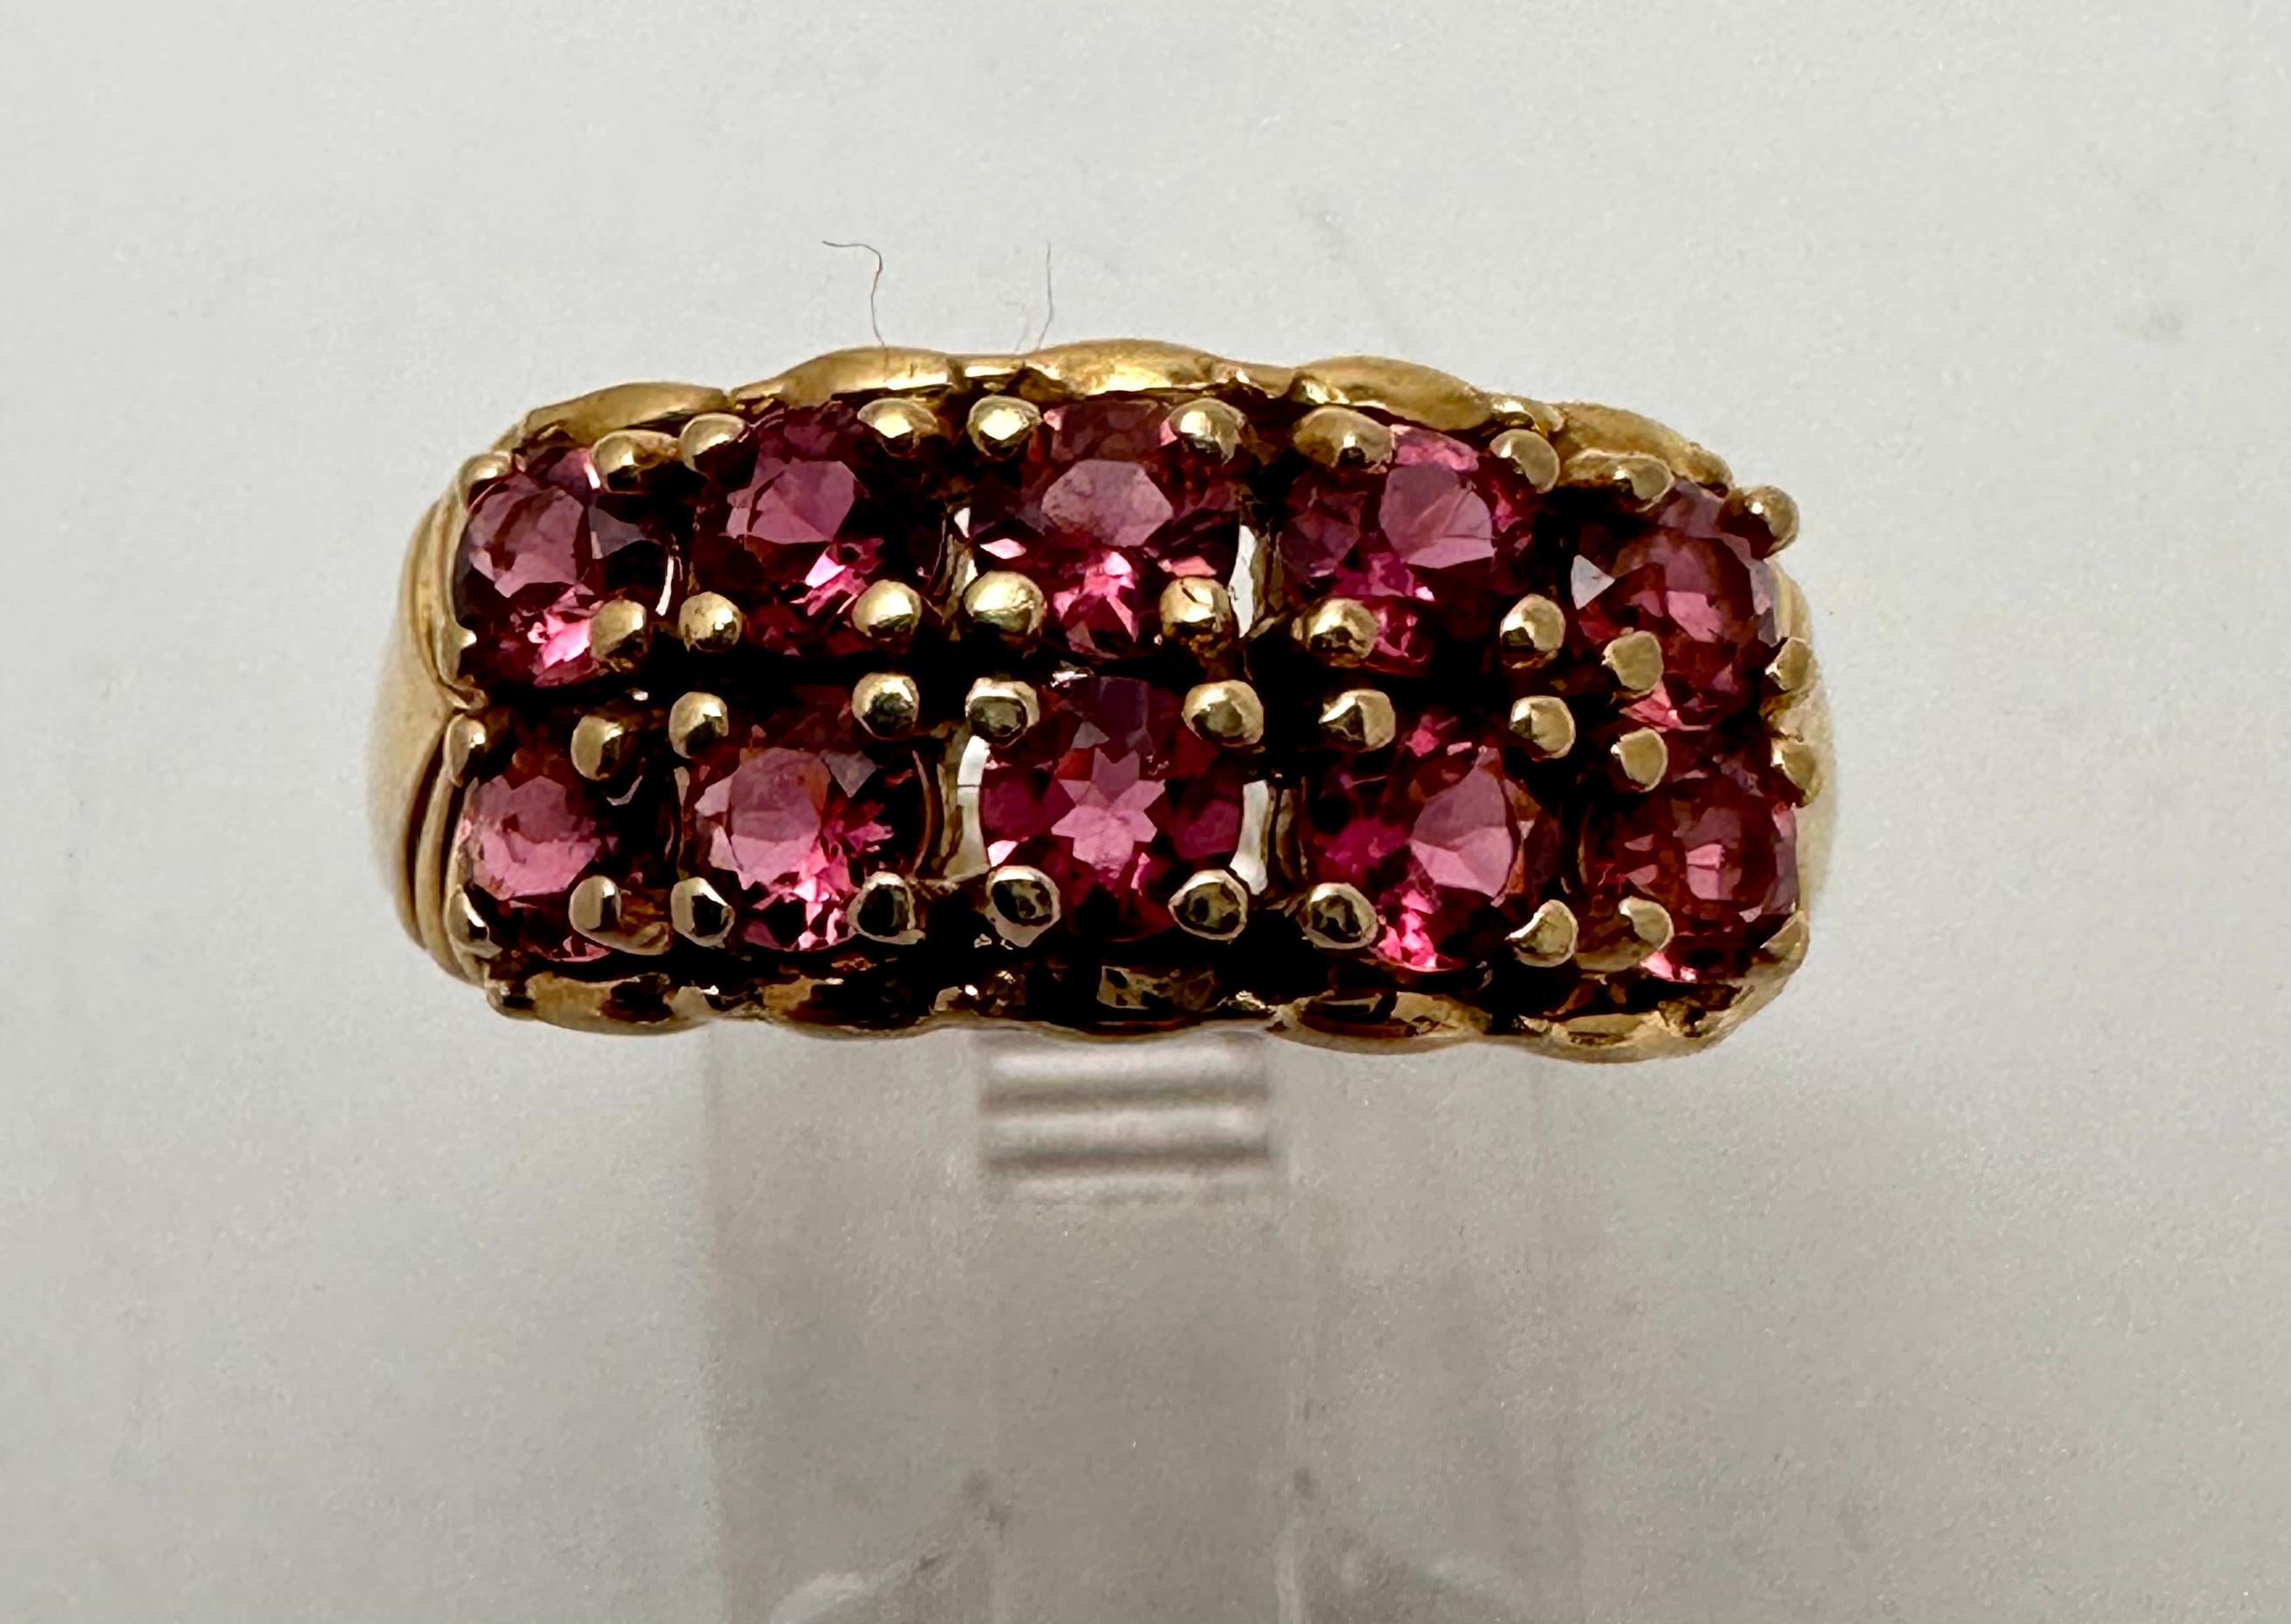 This stunning 14k yellow gold ring boasts two rows of 5 stones each, (ten total) natural round-shaped rubies approx 3mm. The ring is a size 7.25 and can be further adjusted to fit with its sizeable option. The prong setting style enhances the beauty